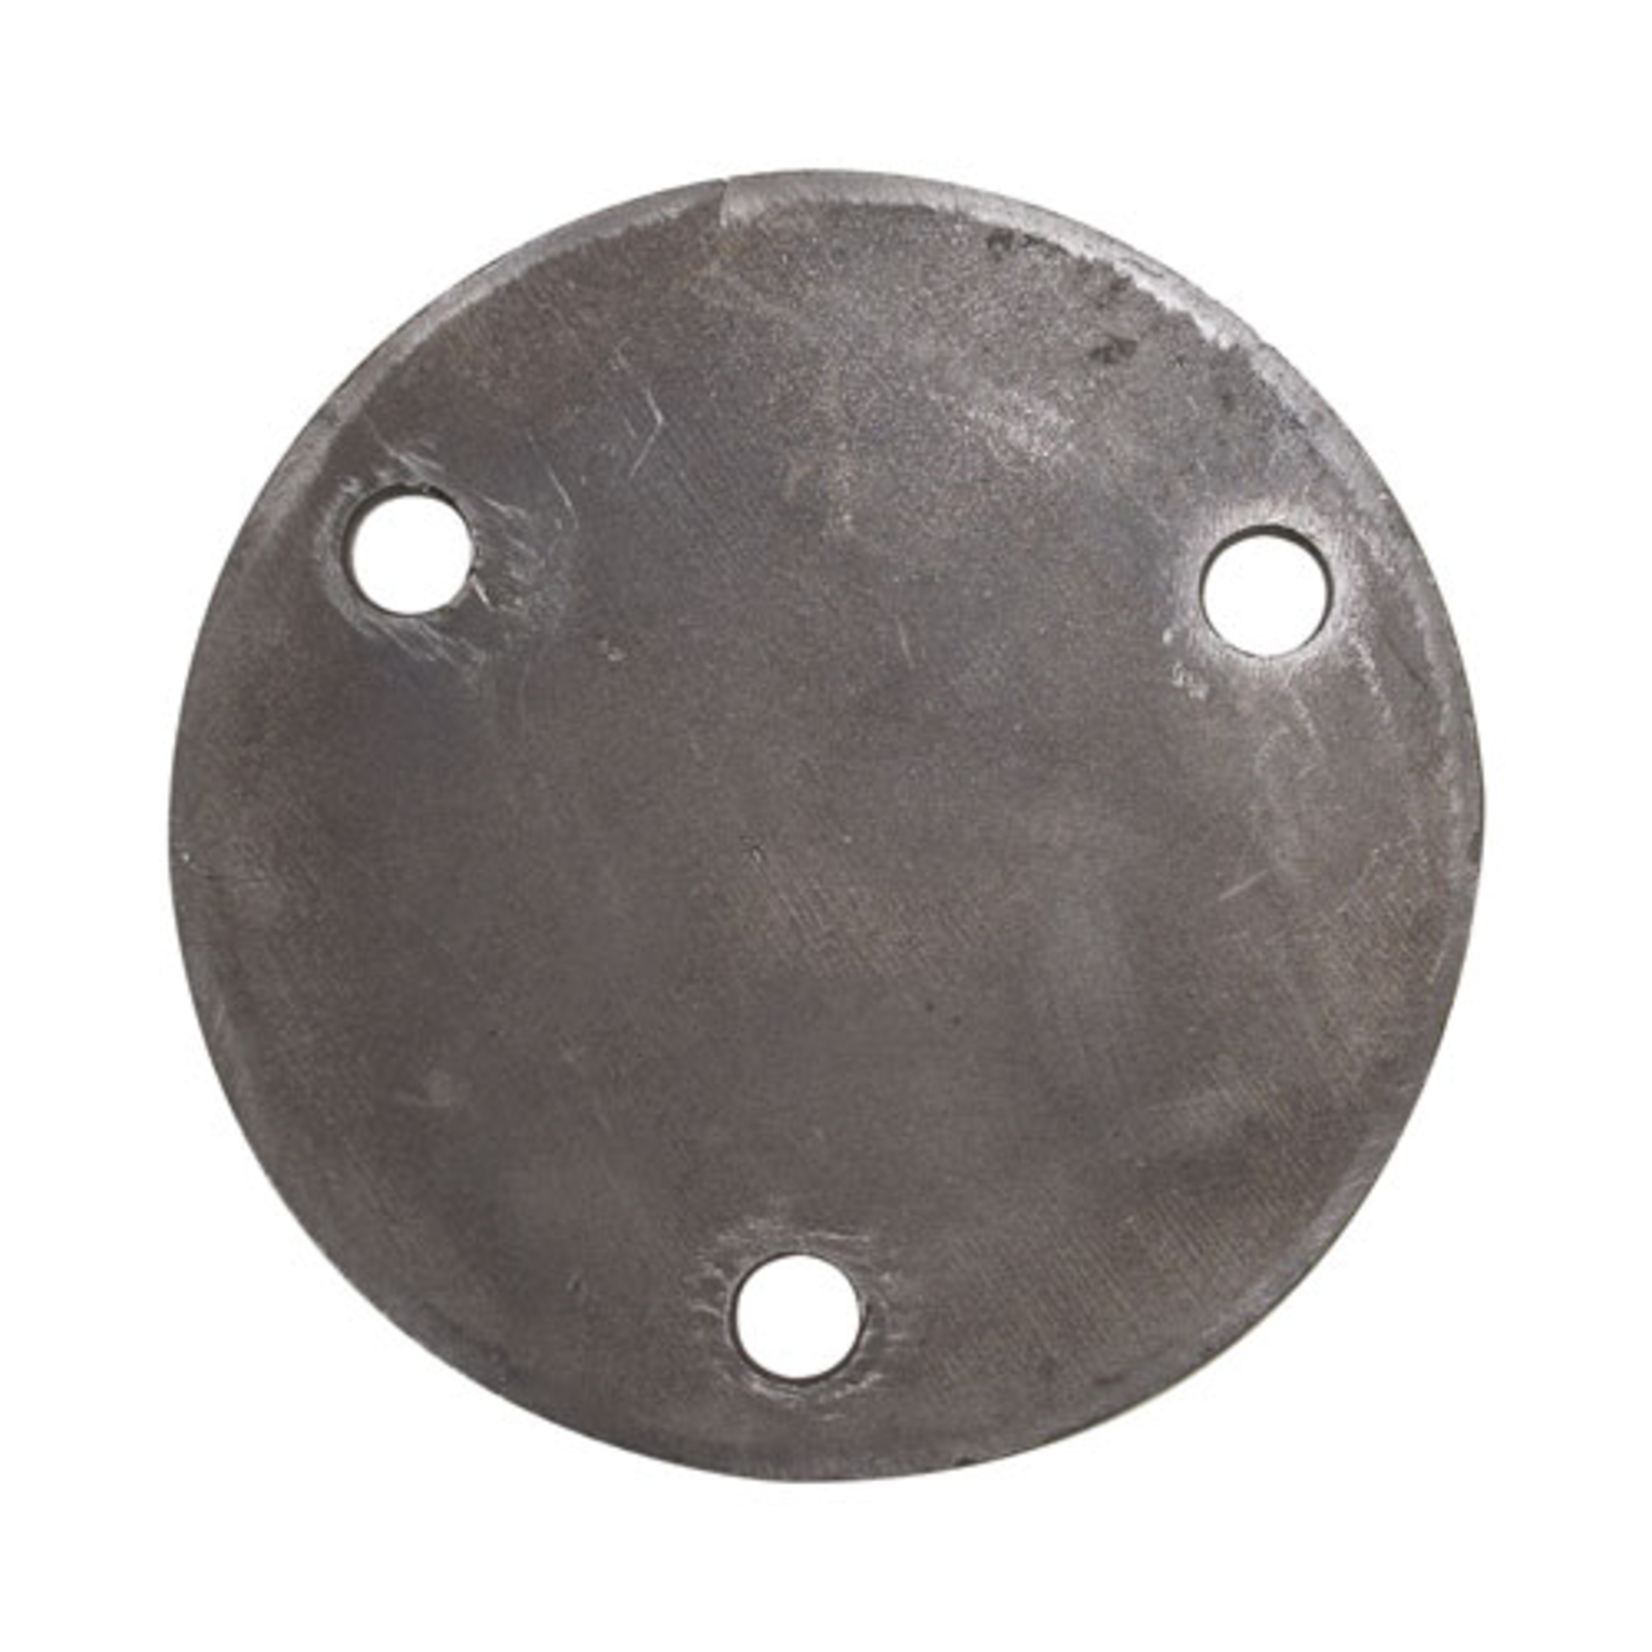 King Metals Base Plate 4-3/4" Round 7/16" Holes, 3/16"